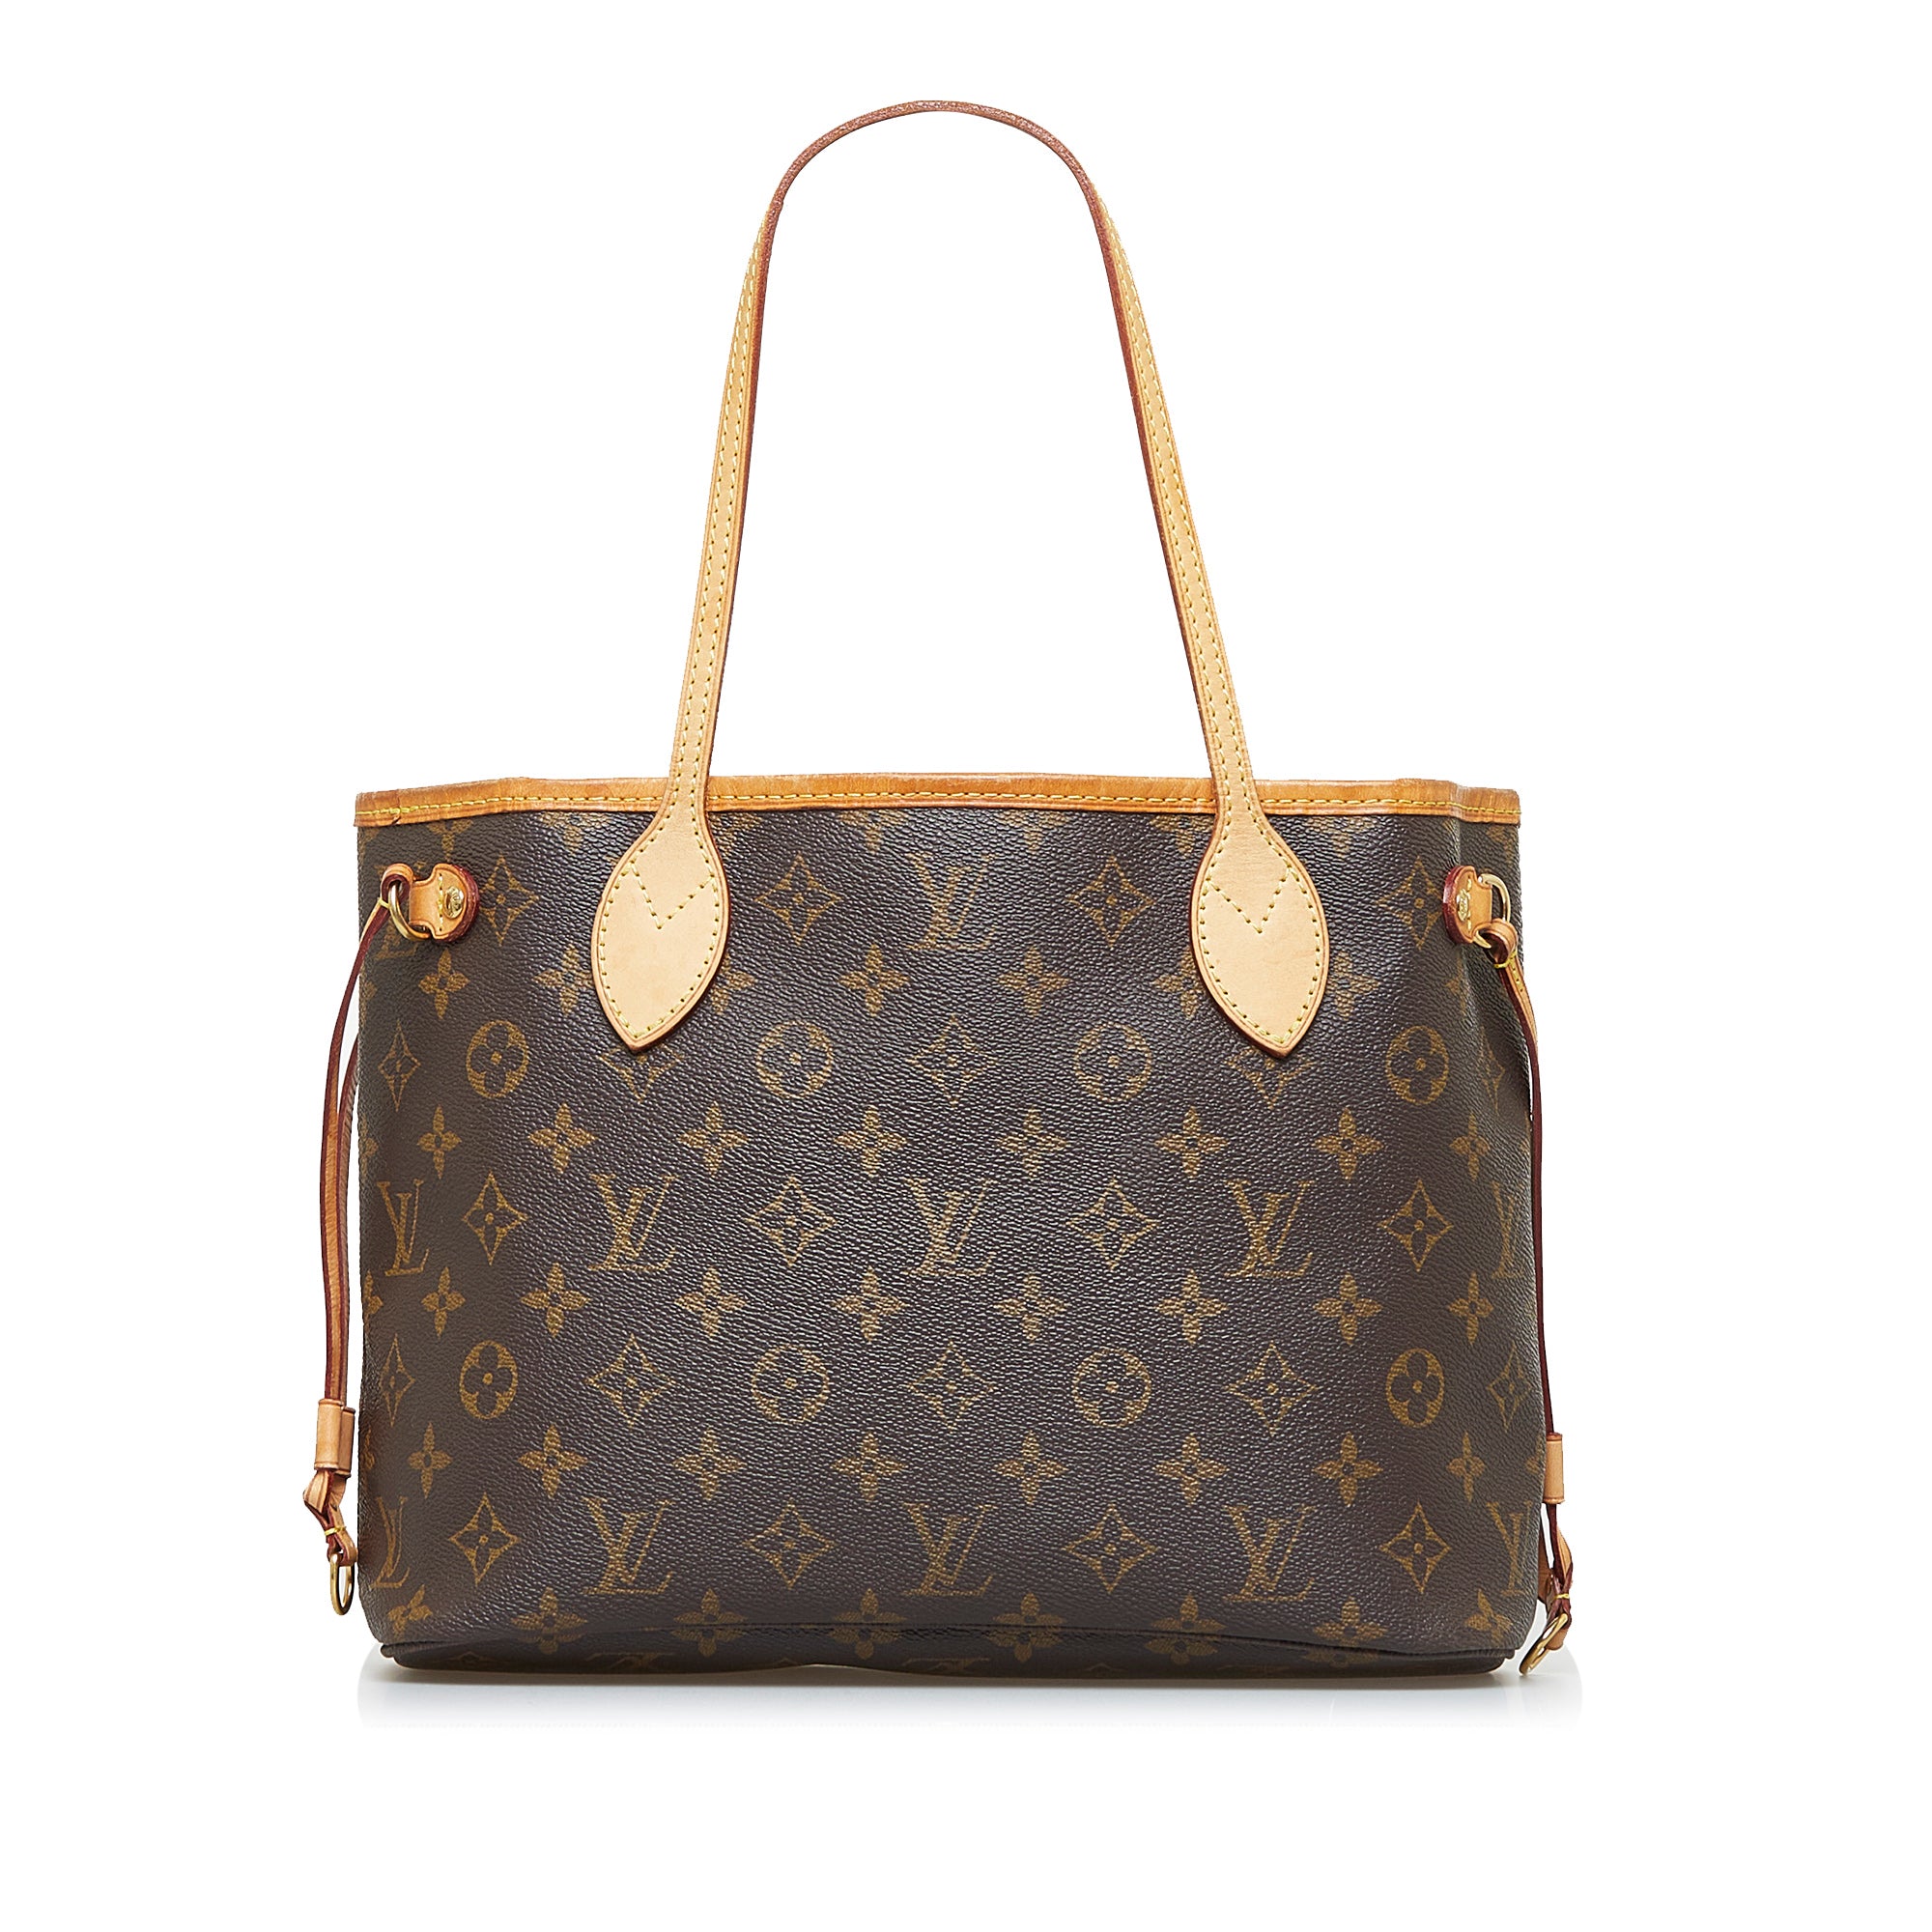 Neverfull PM question.